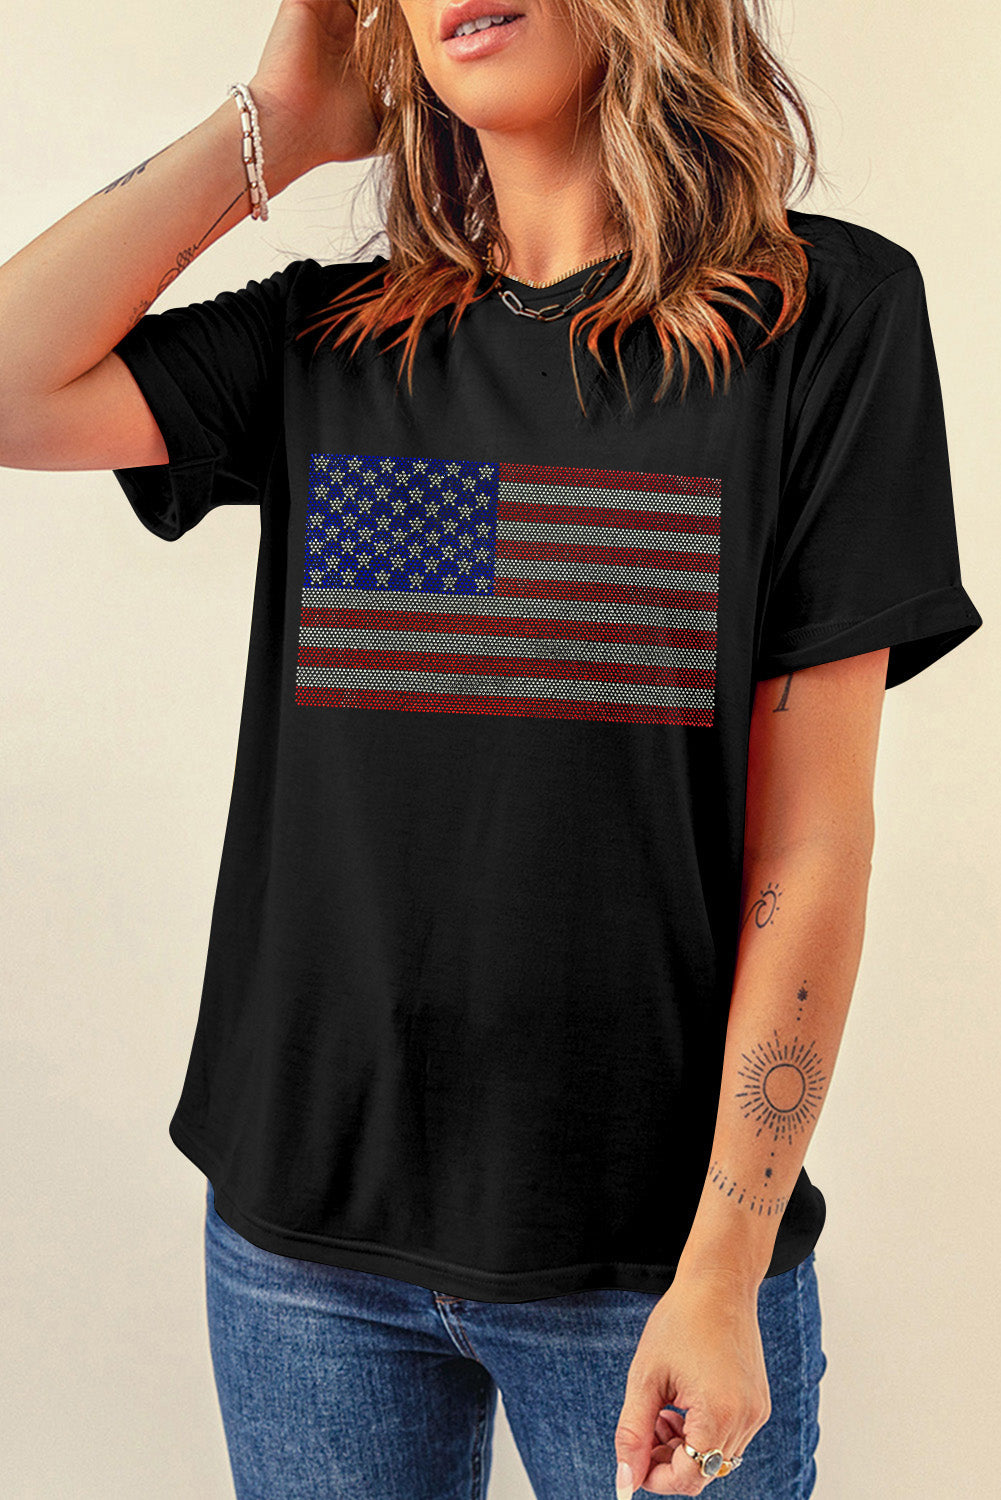 Sparkle in this Black Rhinestone American Flag Tee! Perfect blend of patriotism and style for any casual or celebratory occasion.